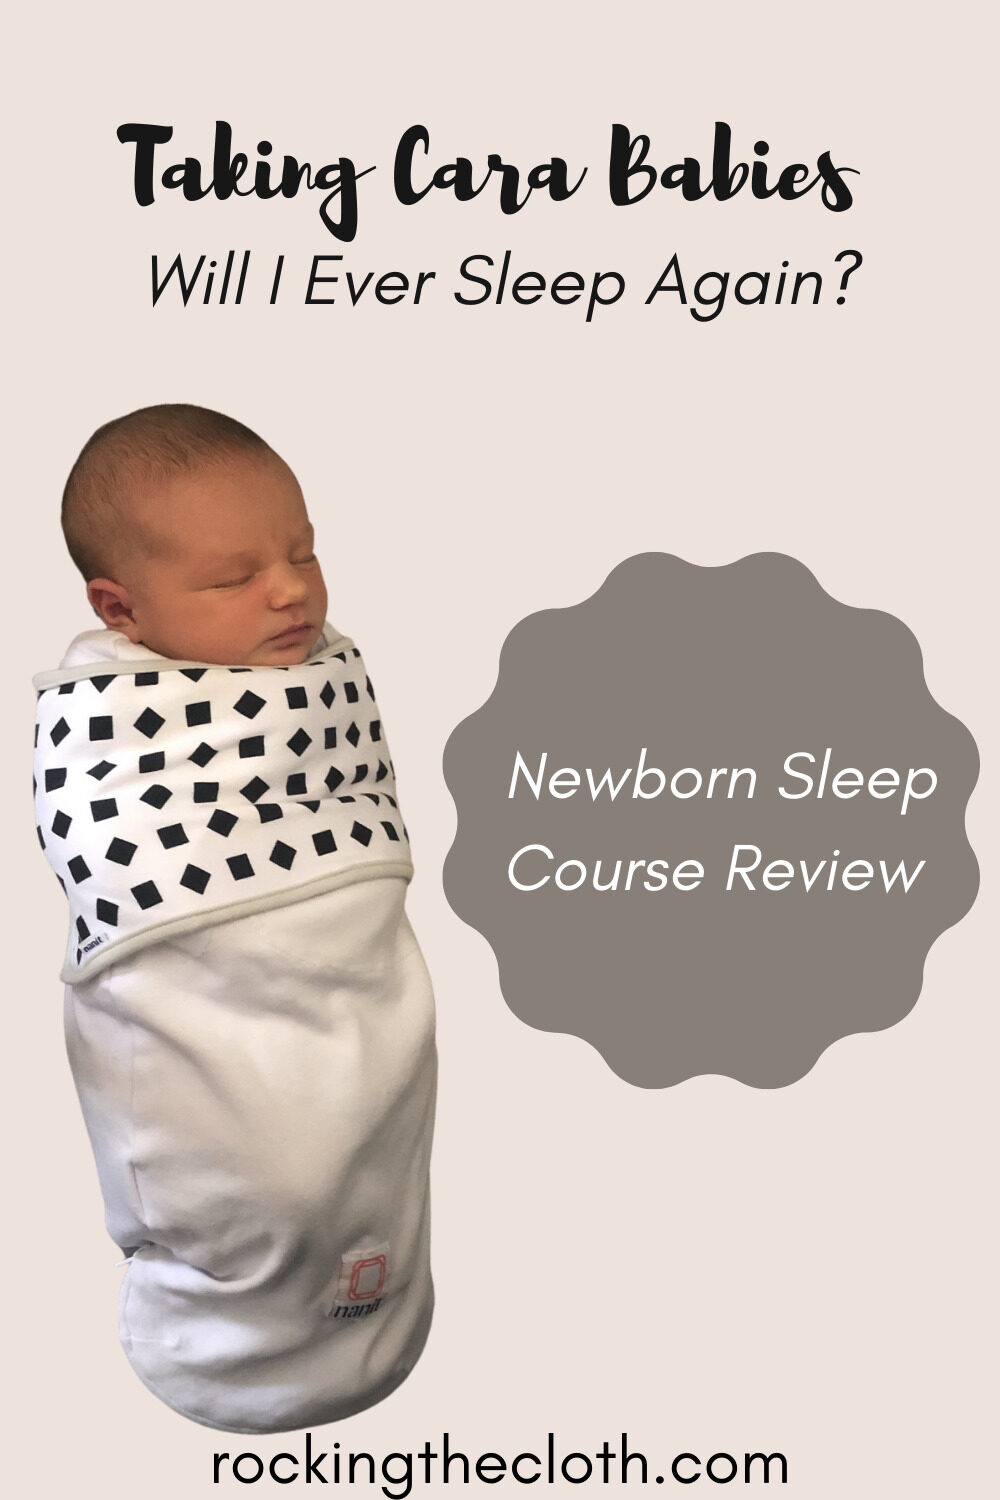 Taking Cara Babies Newborn Course Review – Will I Ever Sleep Again?